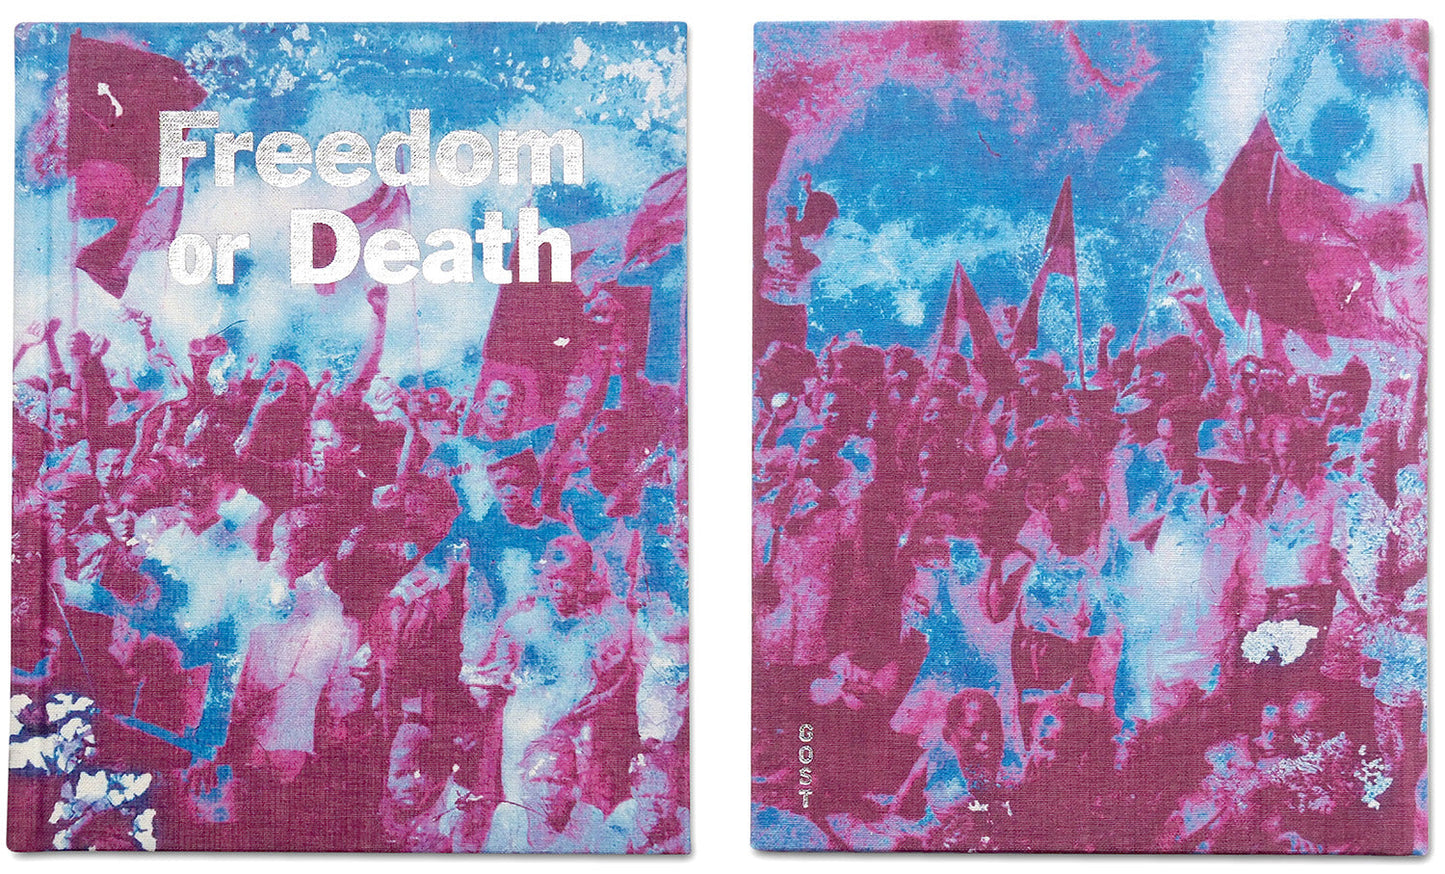 Freedom or Death - Special Edition 12x10